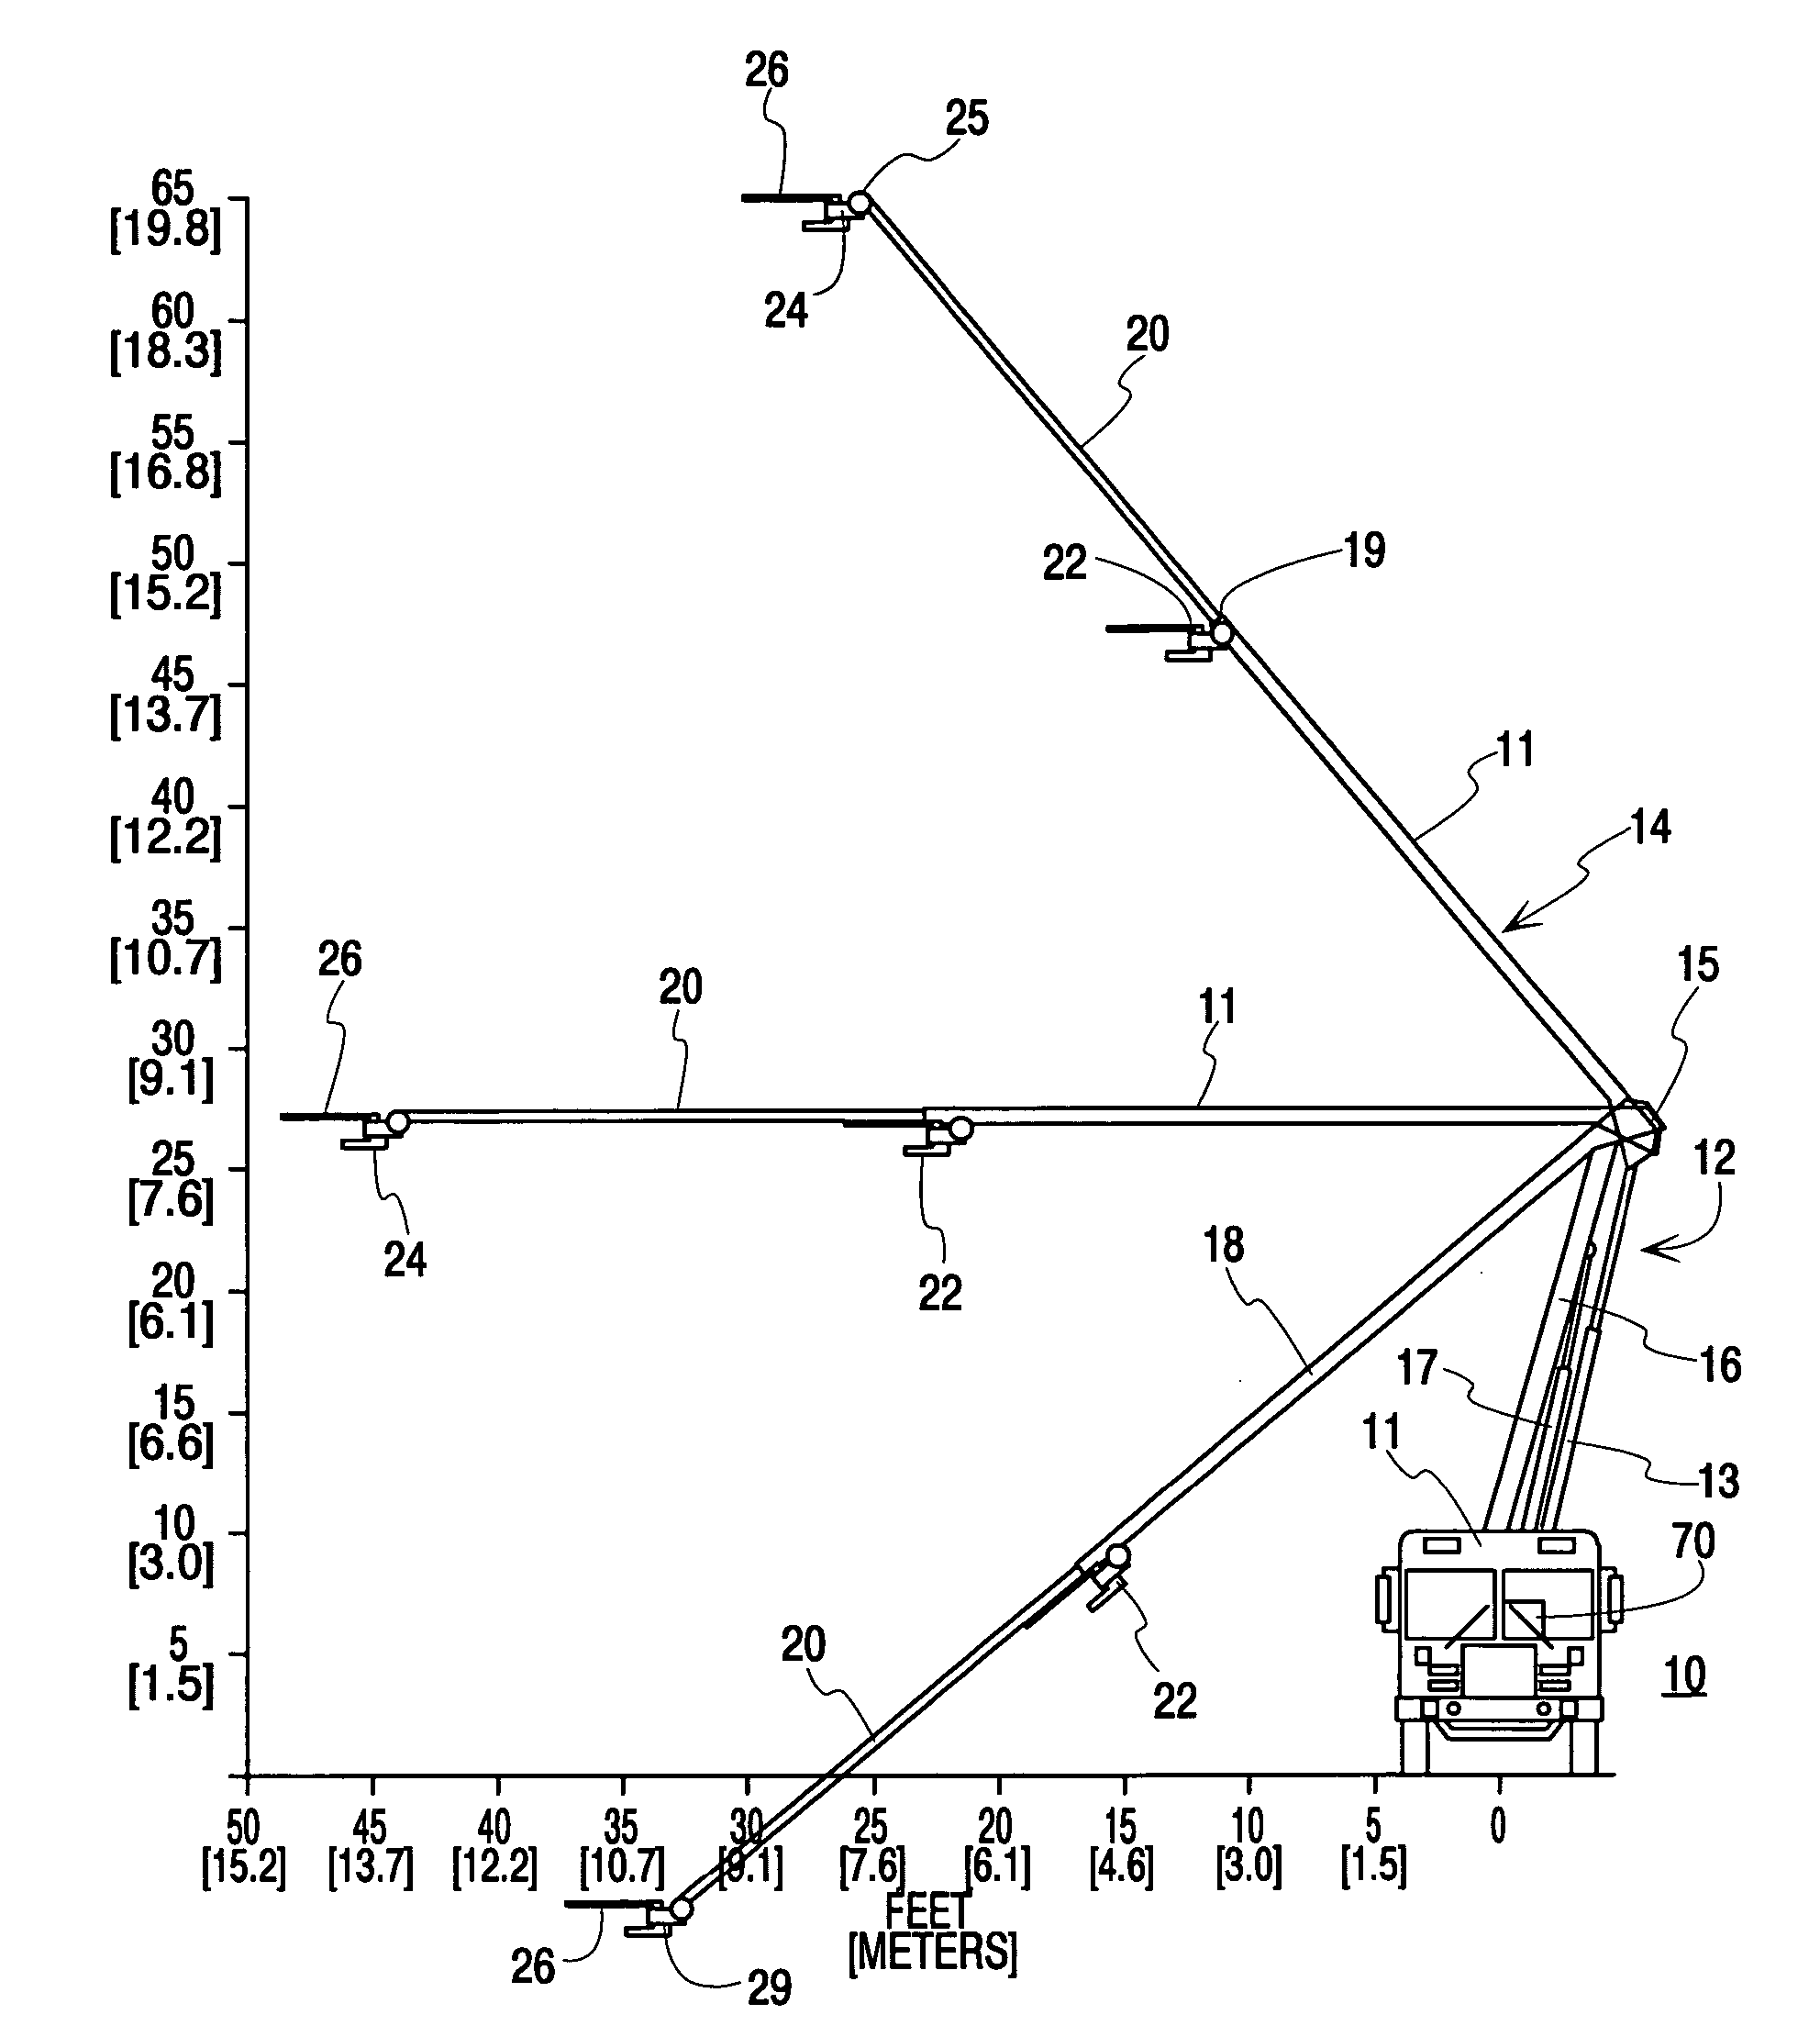 Extensible aerial boom having two independently operated fluid nozzles